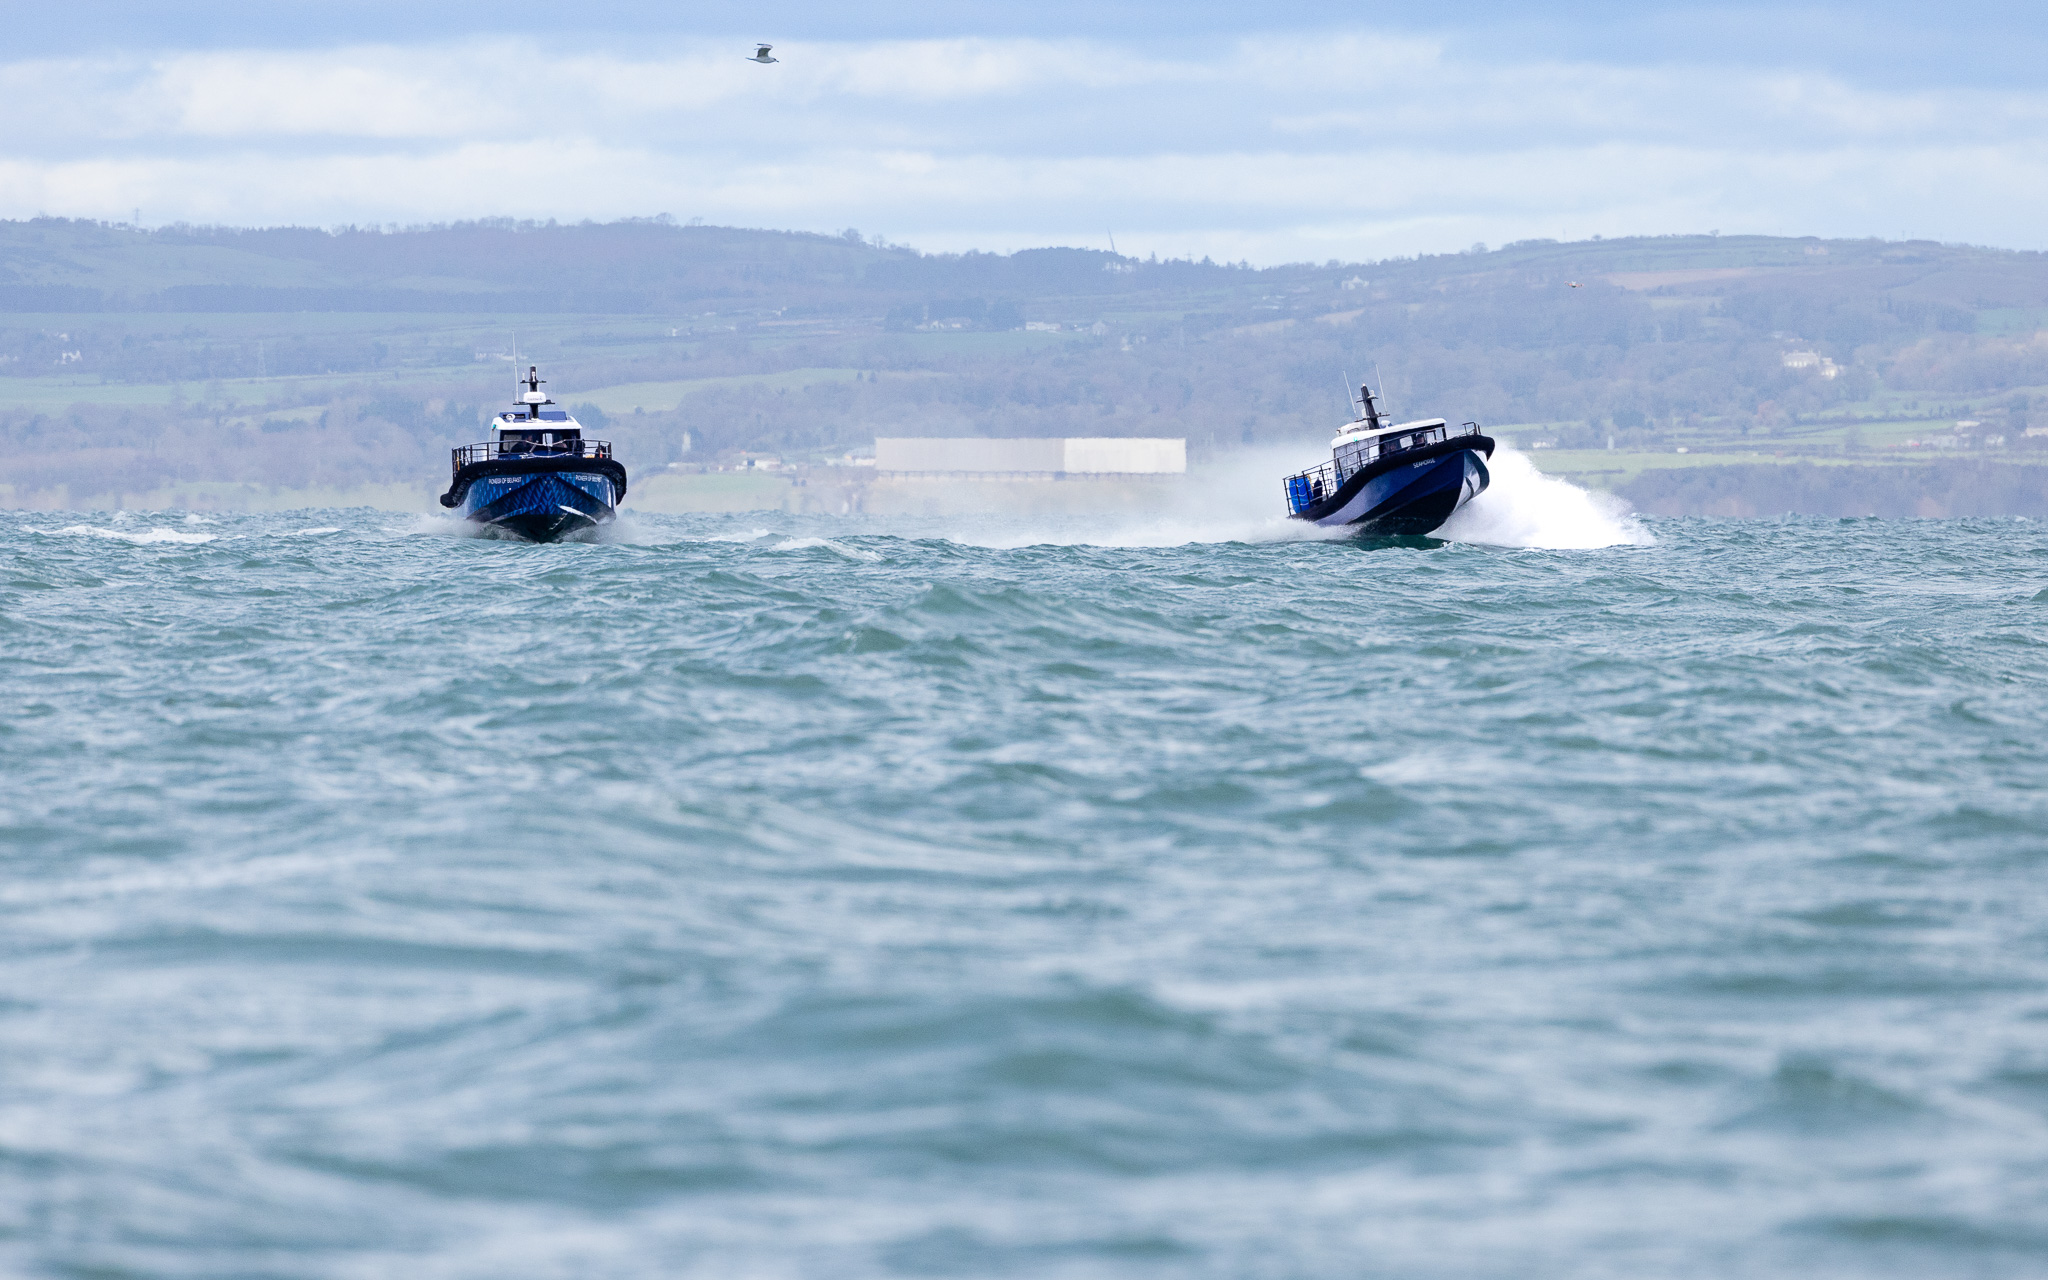 Two boats in parallel. One is foiling through the waves with stability and the other is a displacement vessel and is slamming through the waves